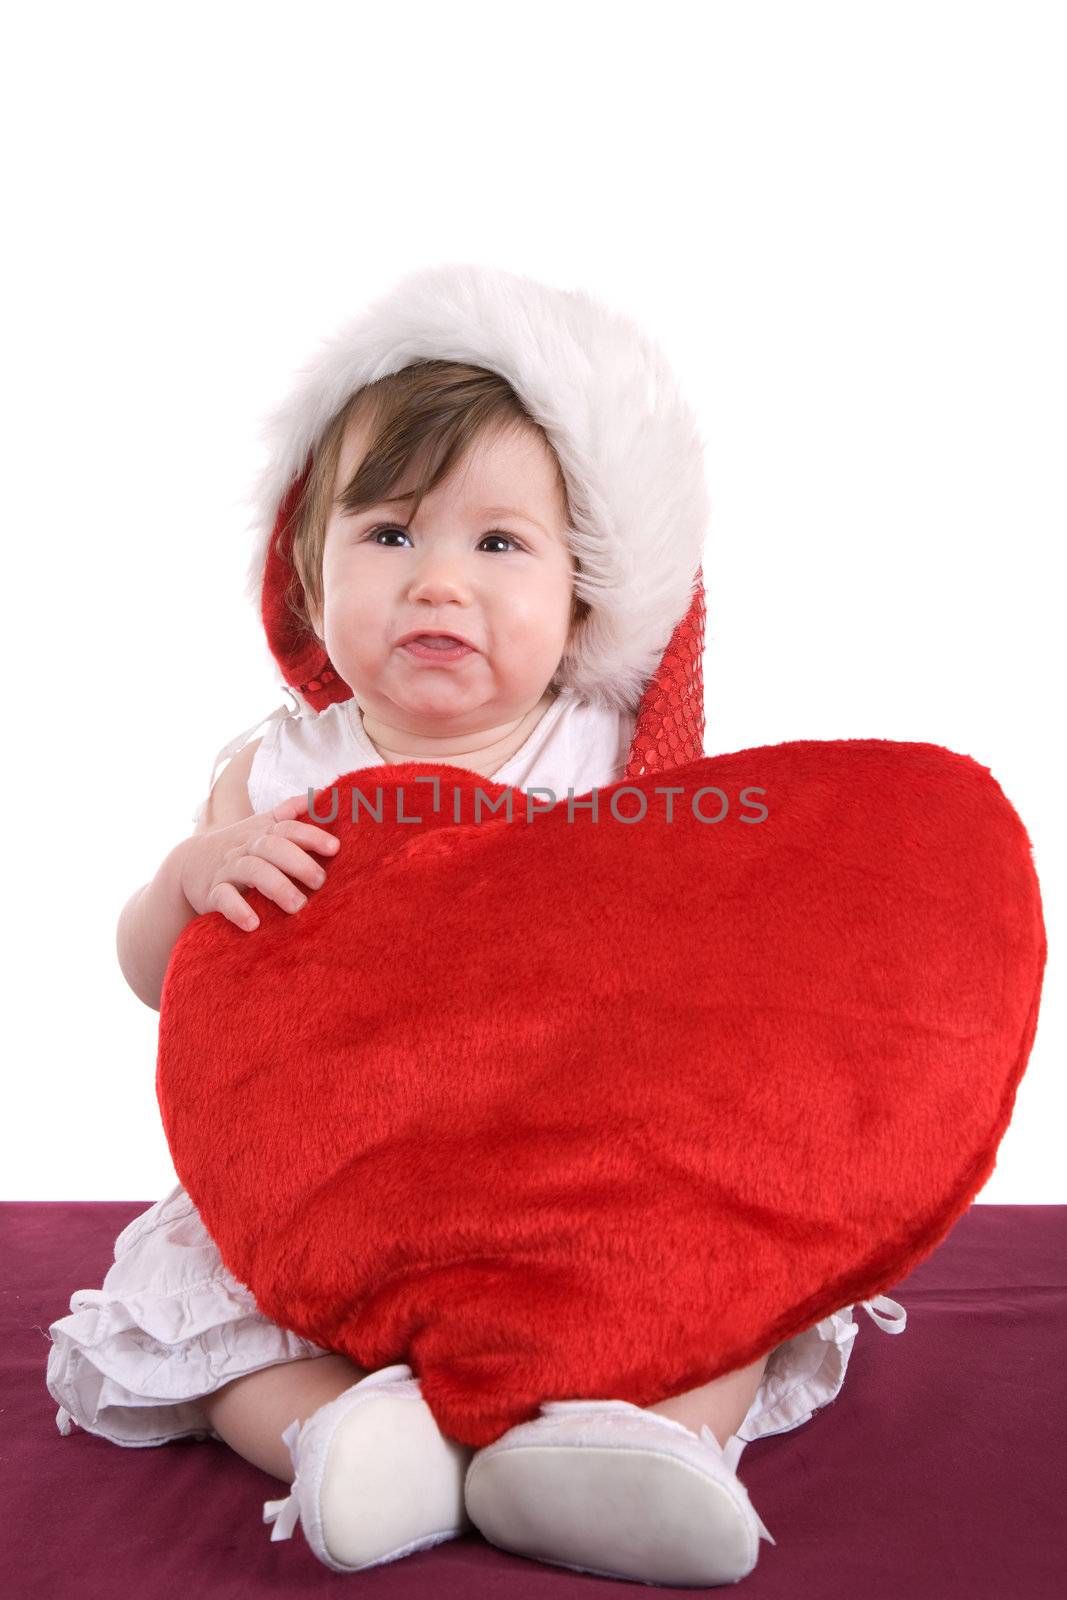 Cute baby girl holding a big red heart and wearing a santa hat